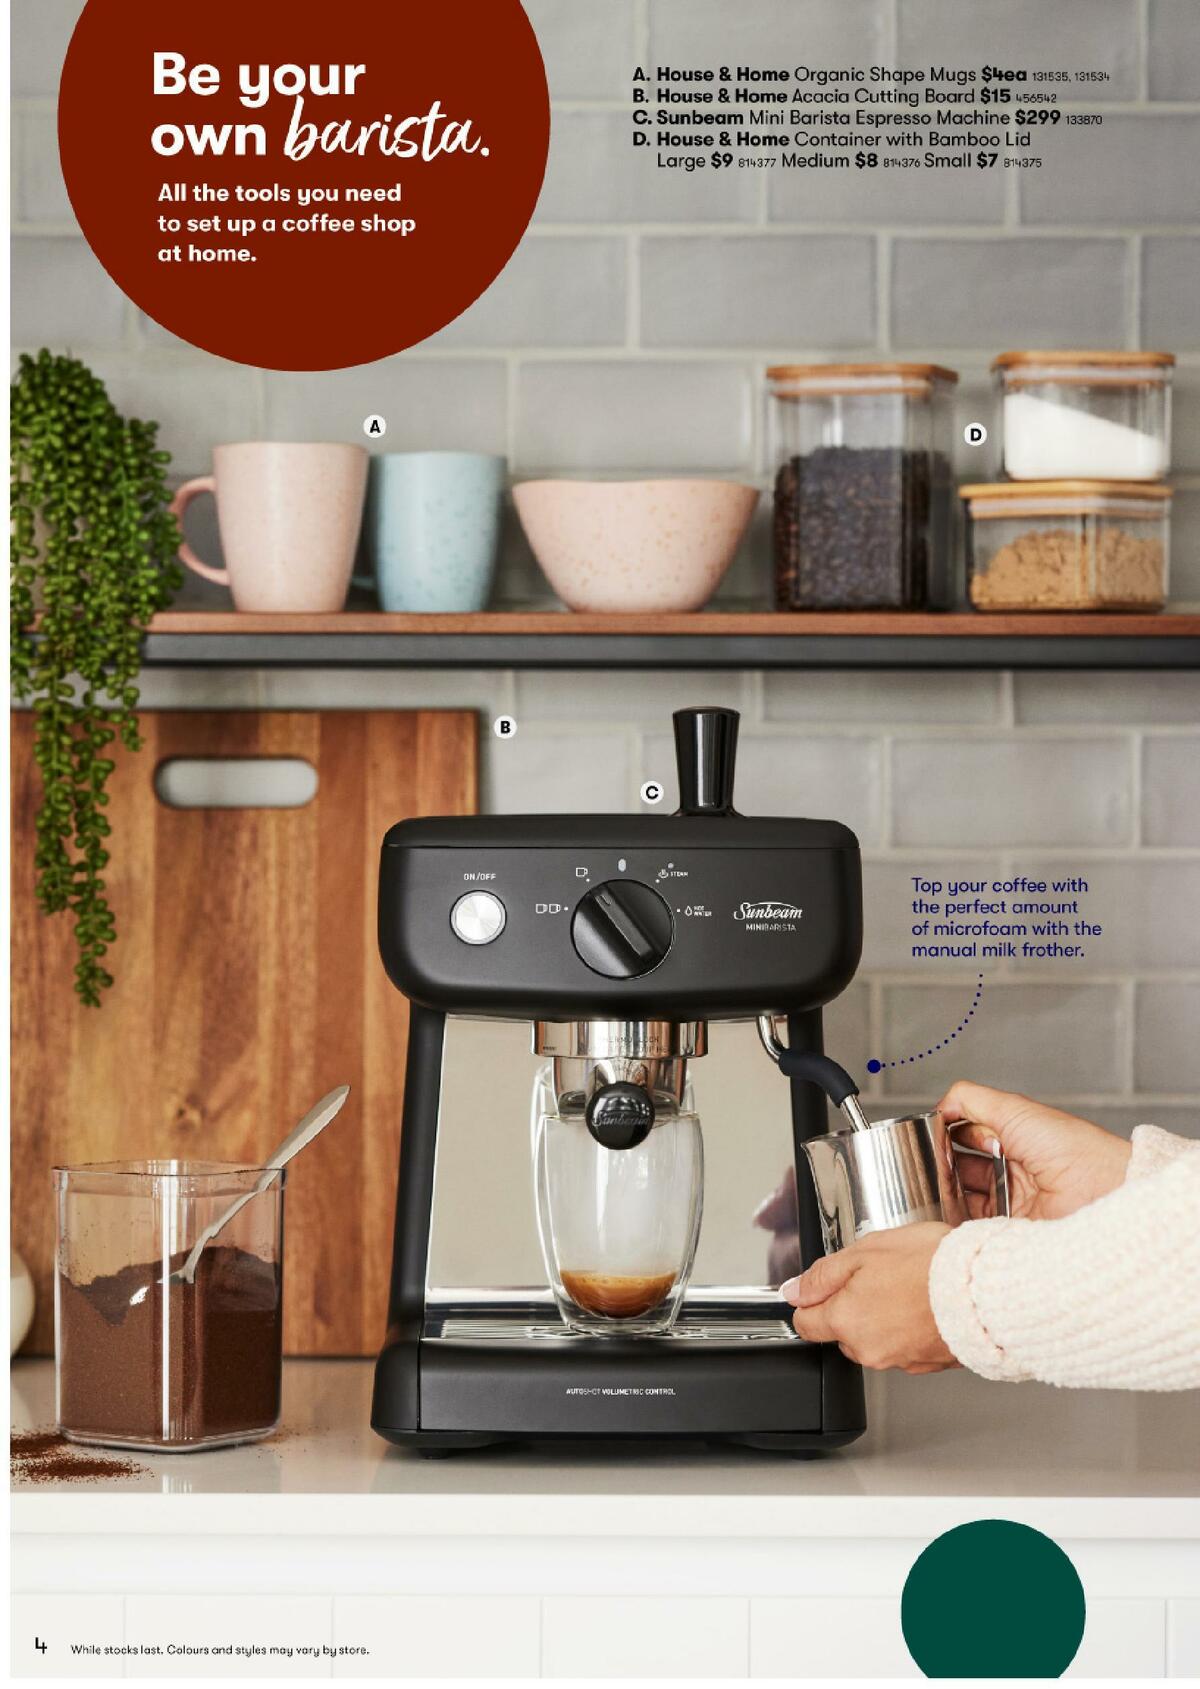 Big W Home for Autumn Lookbook Catalogues from 29 March